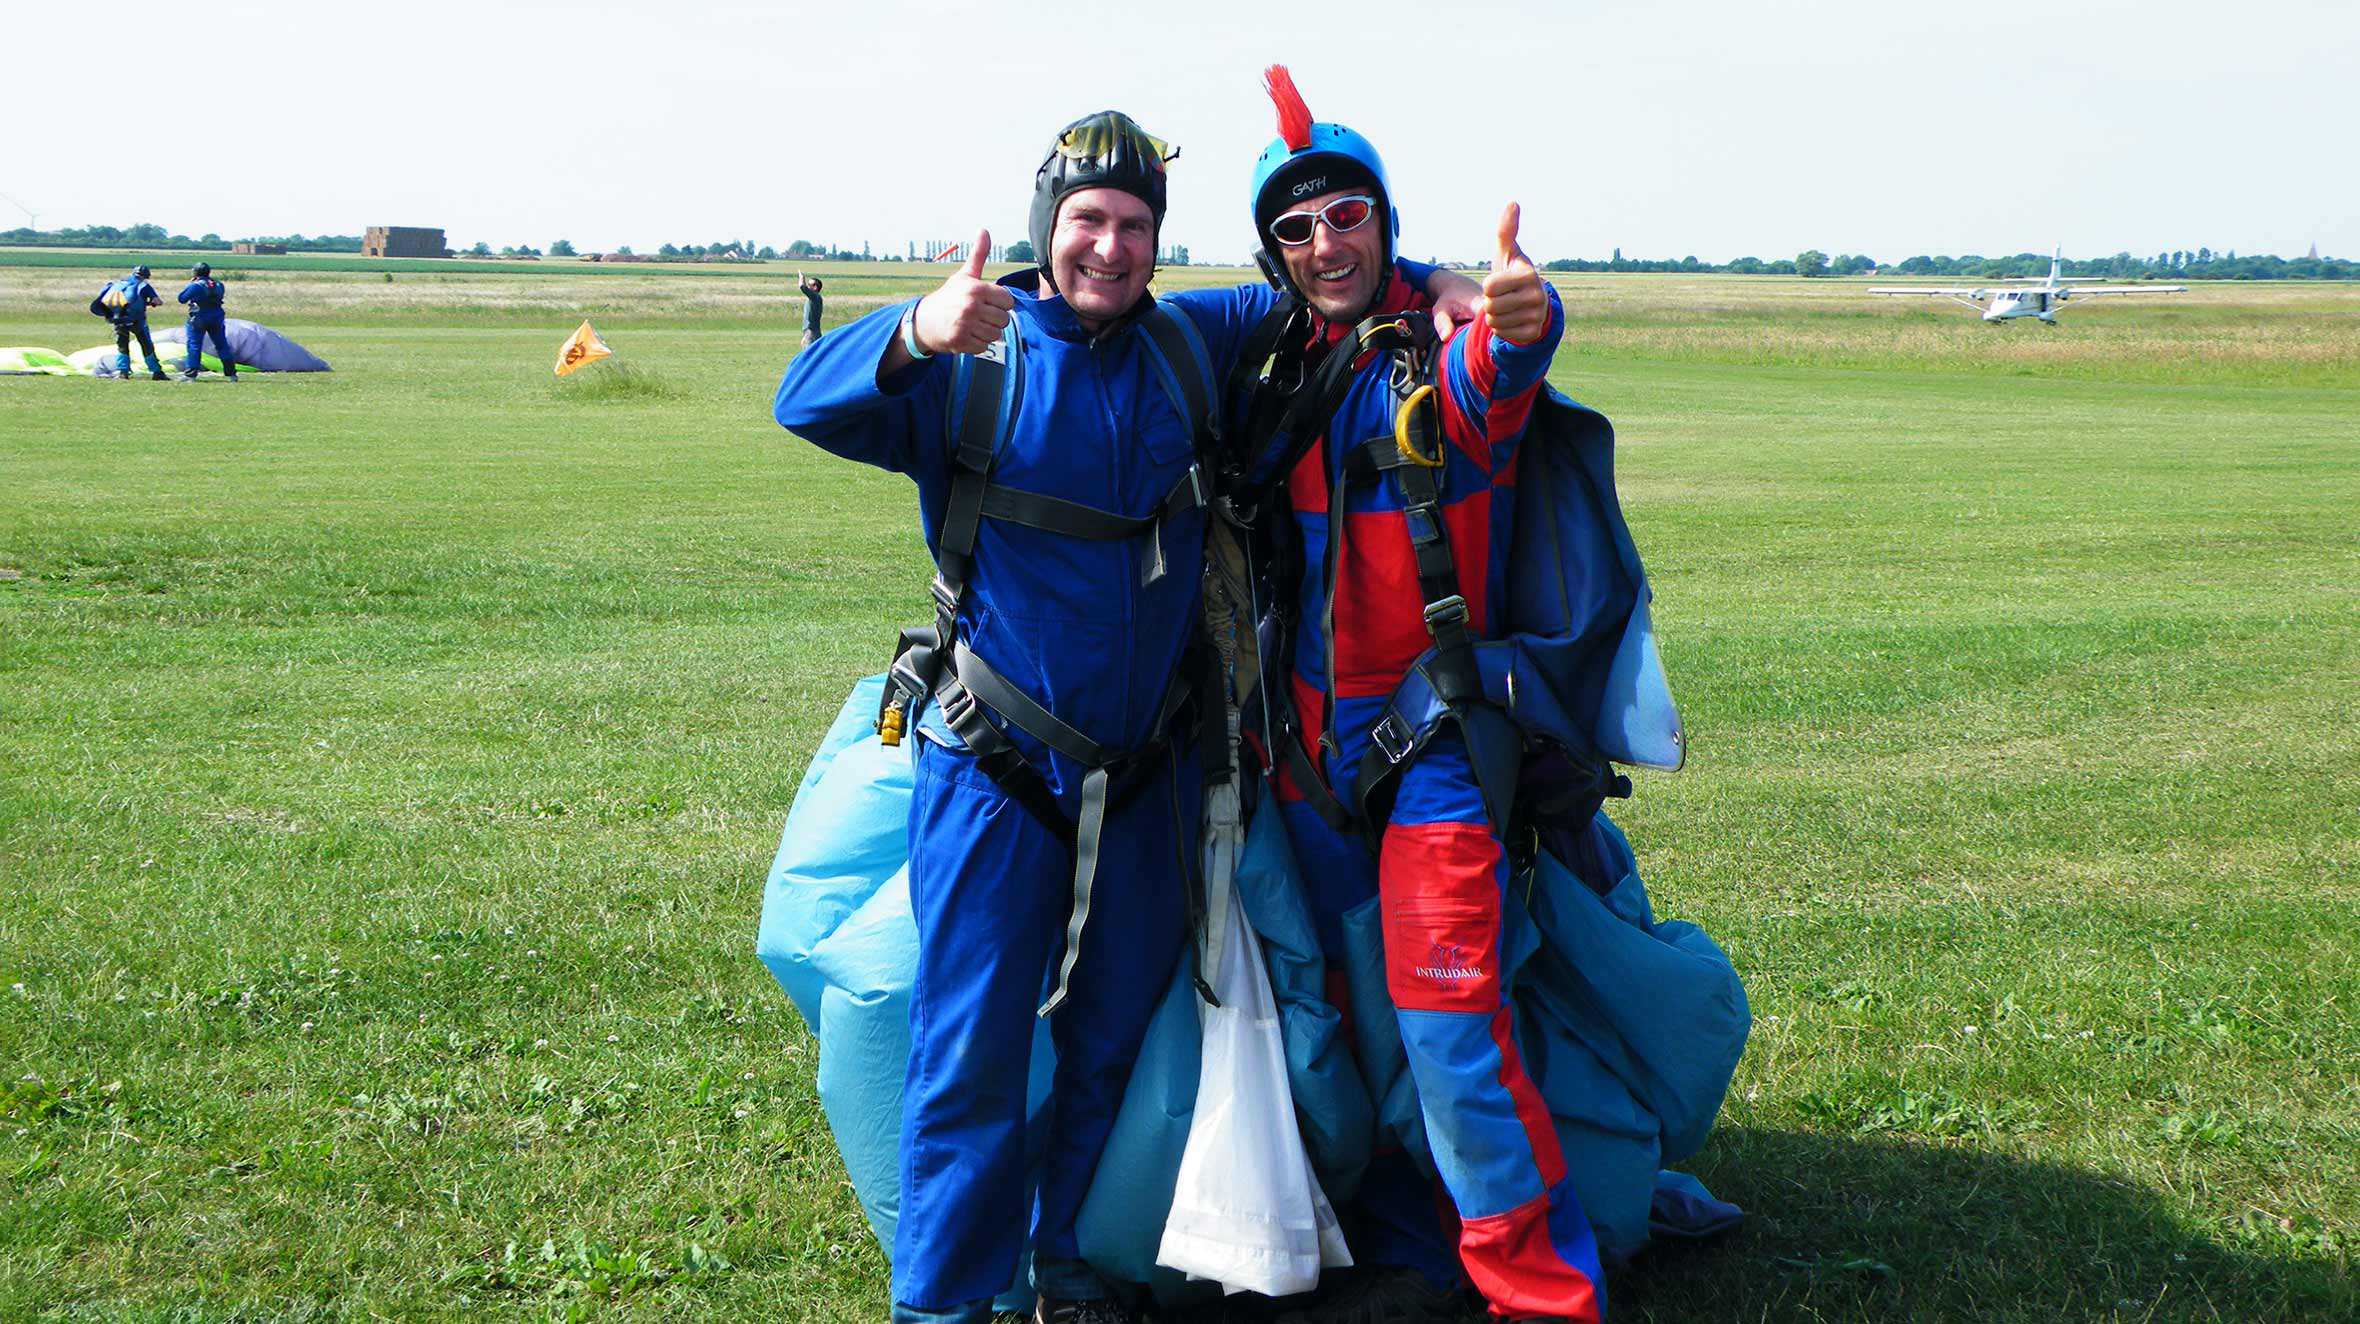 Simon celebrating after completing his skydive for Make-A-Wish UK in 2009.